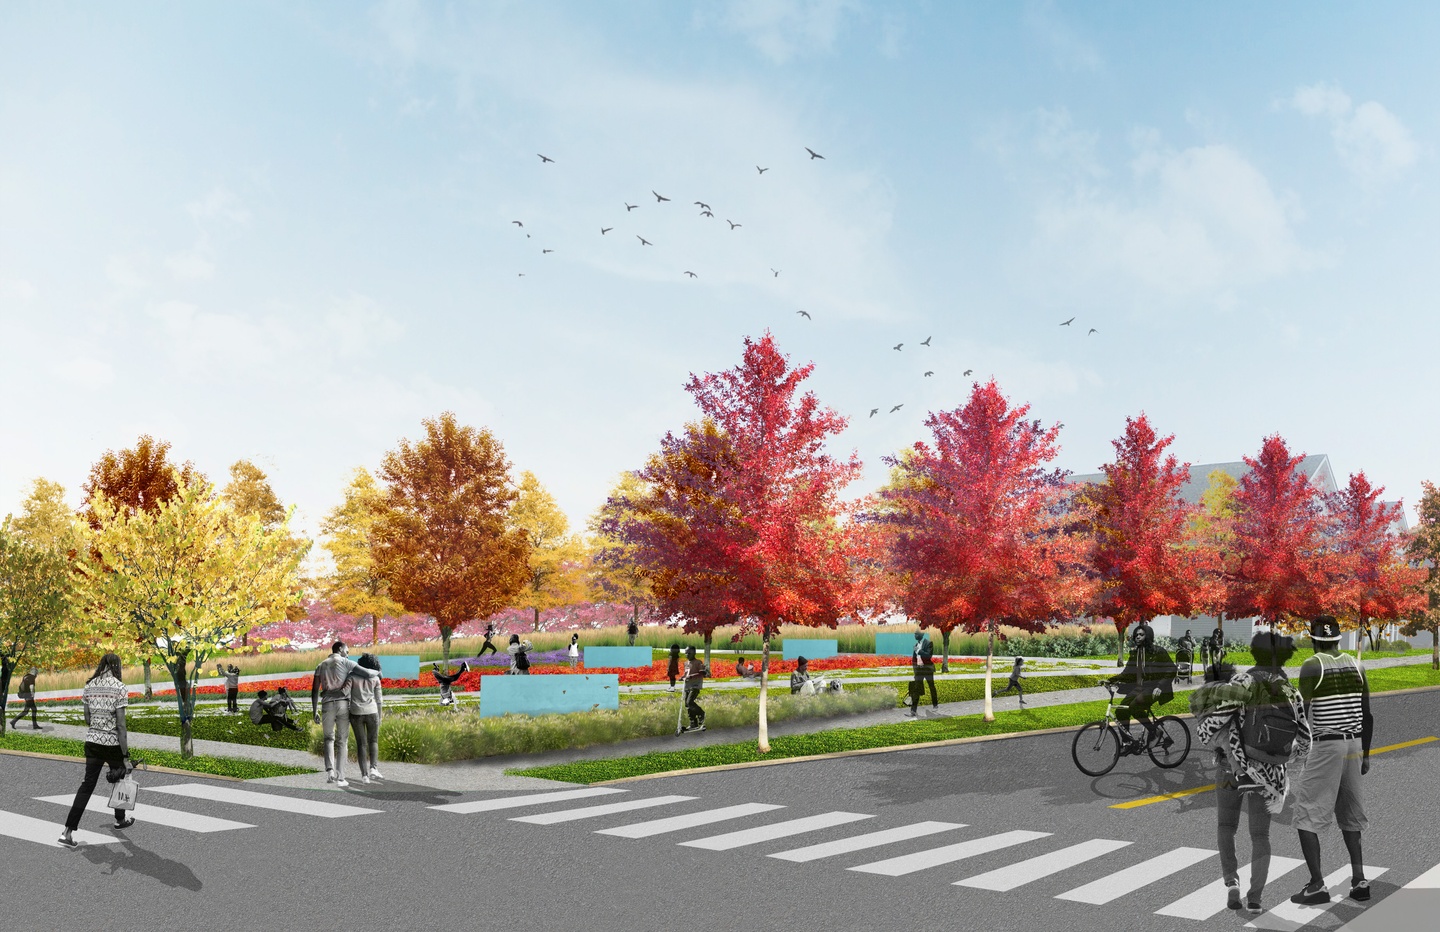 Rendering of a city park filled with medium sized trees with colorful fall foliage.